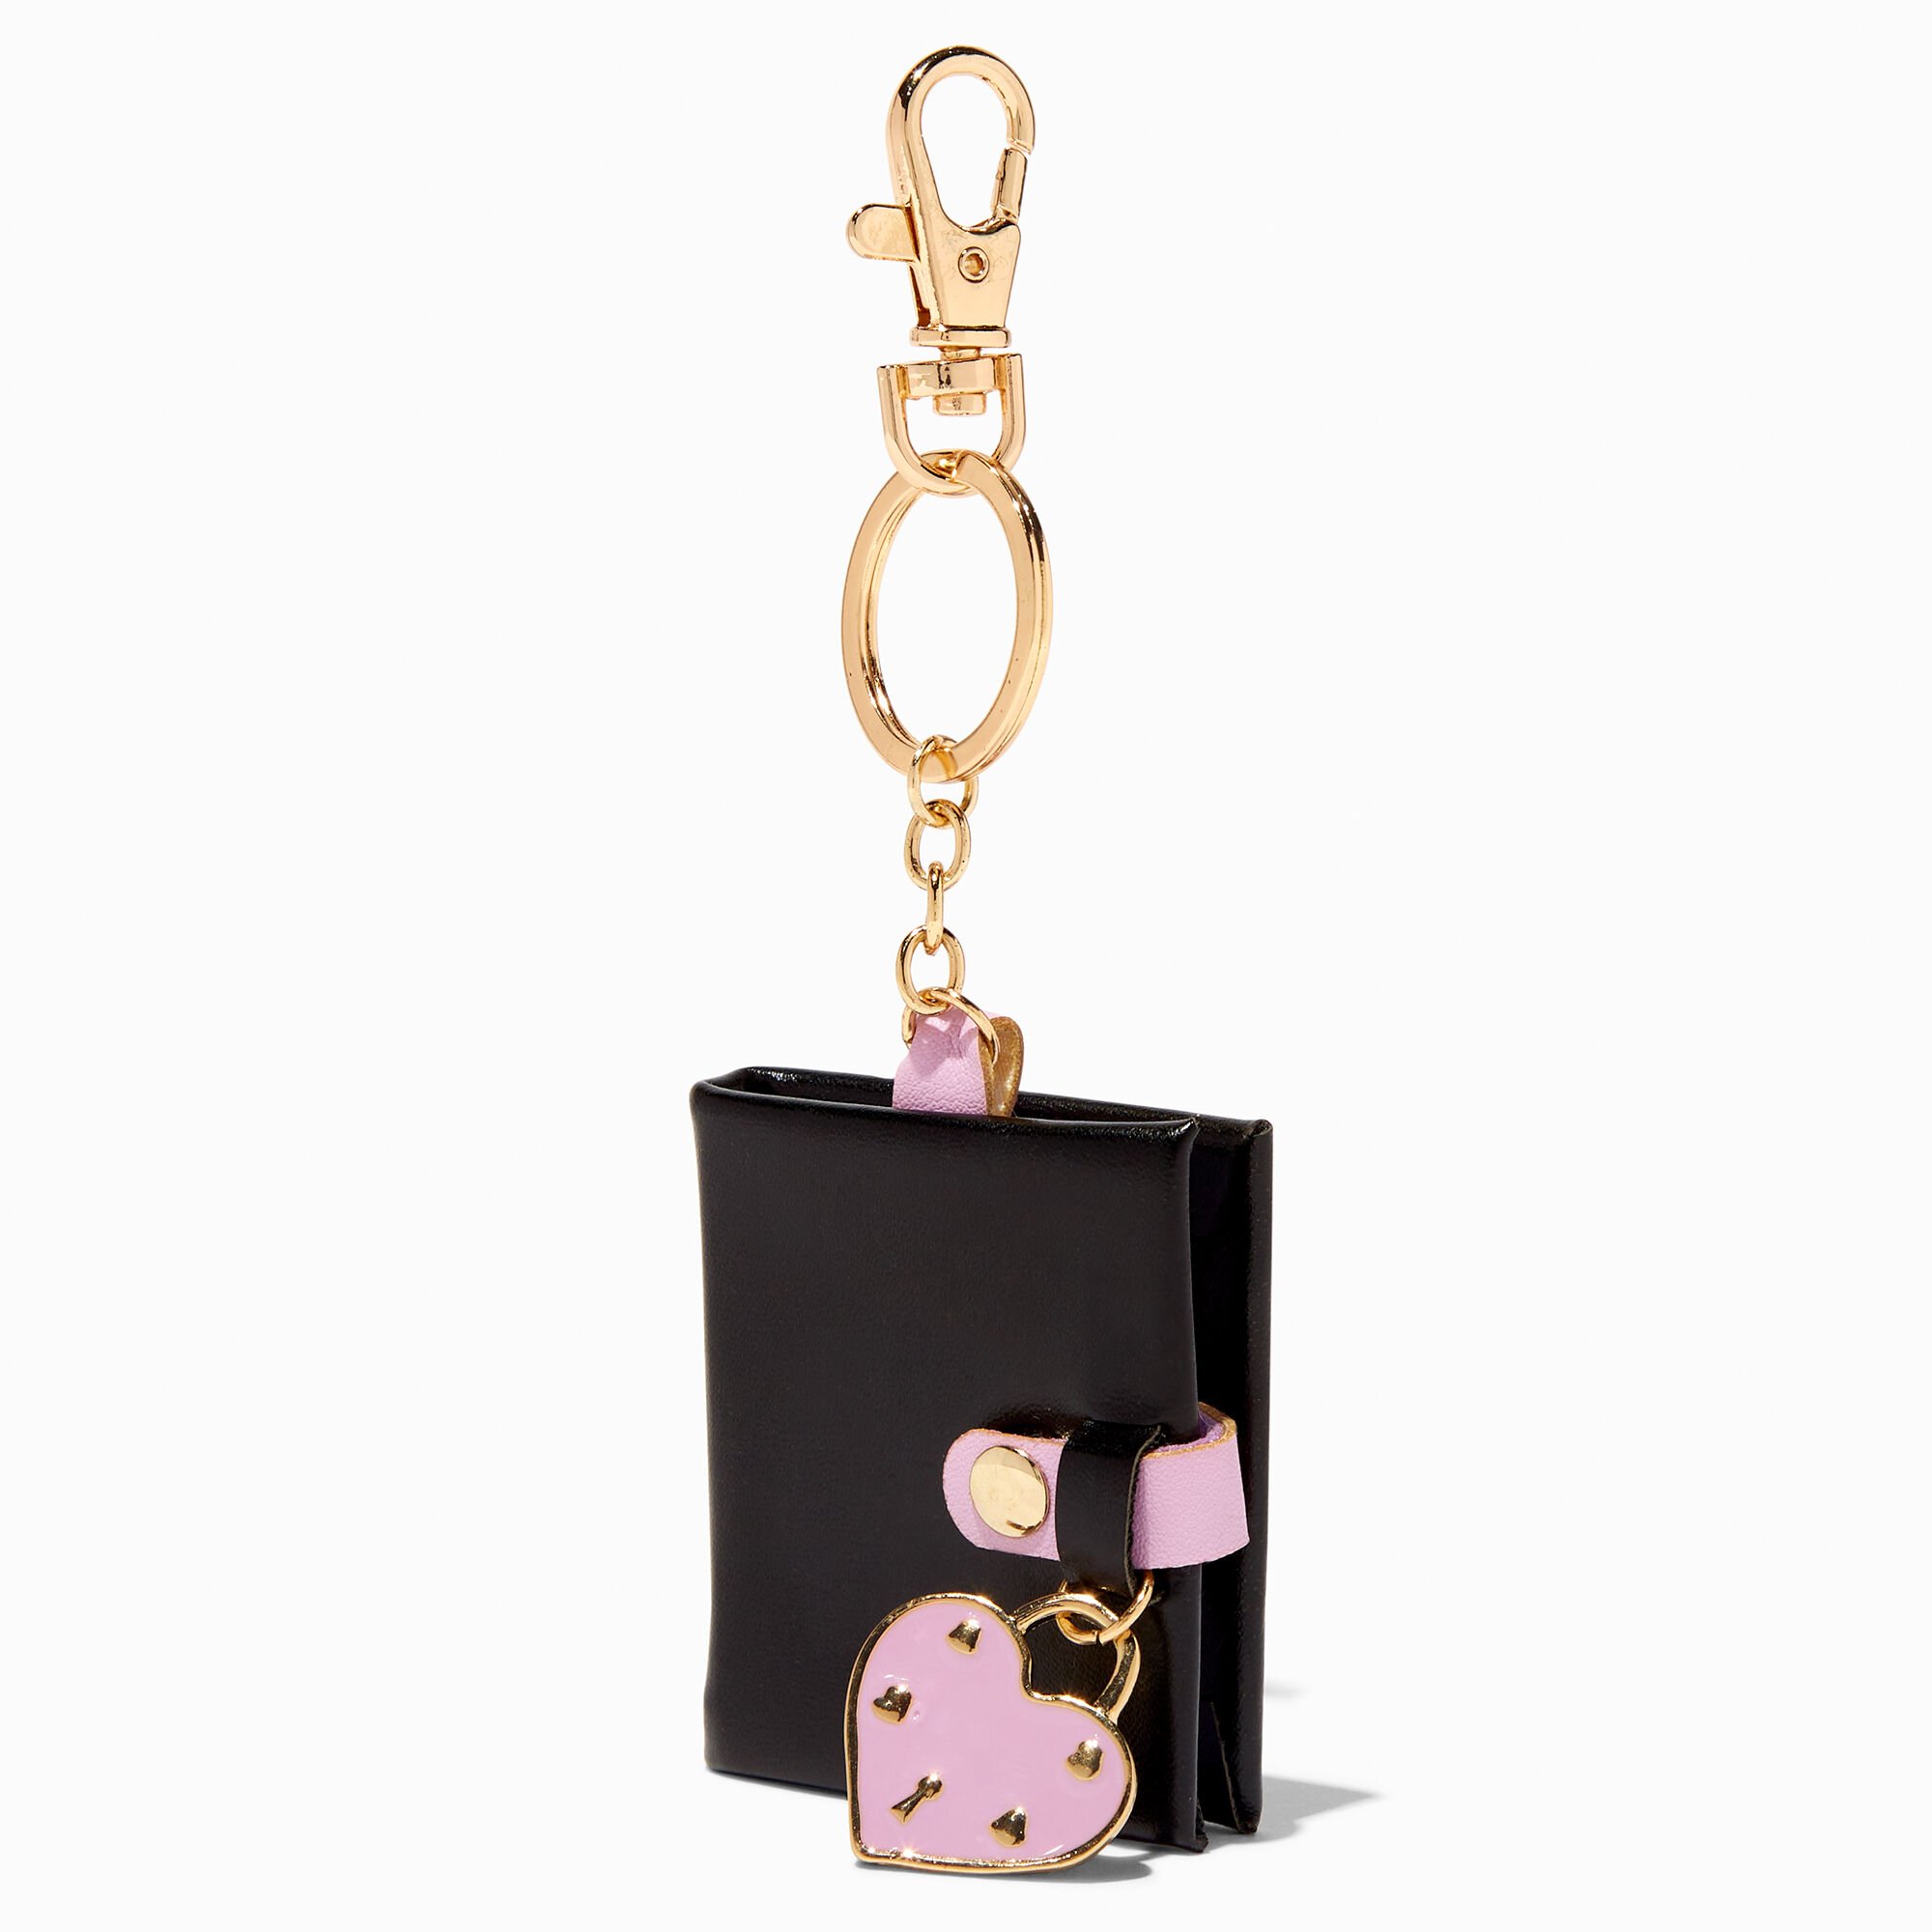 View Claires Purple Heart Charm Mini Diary Keychain Black information